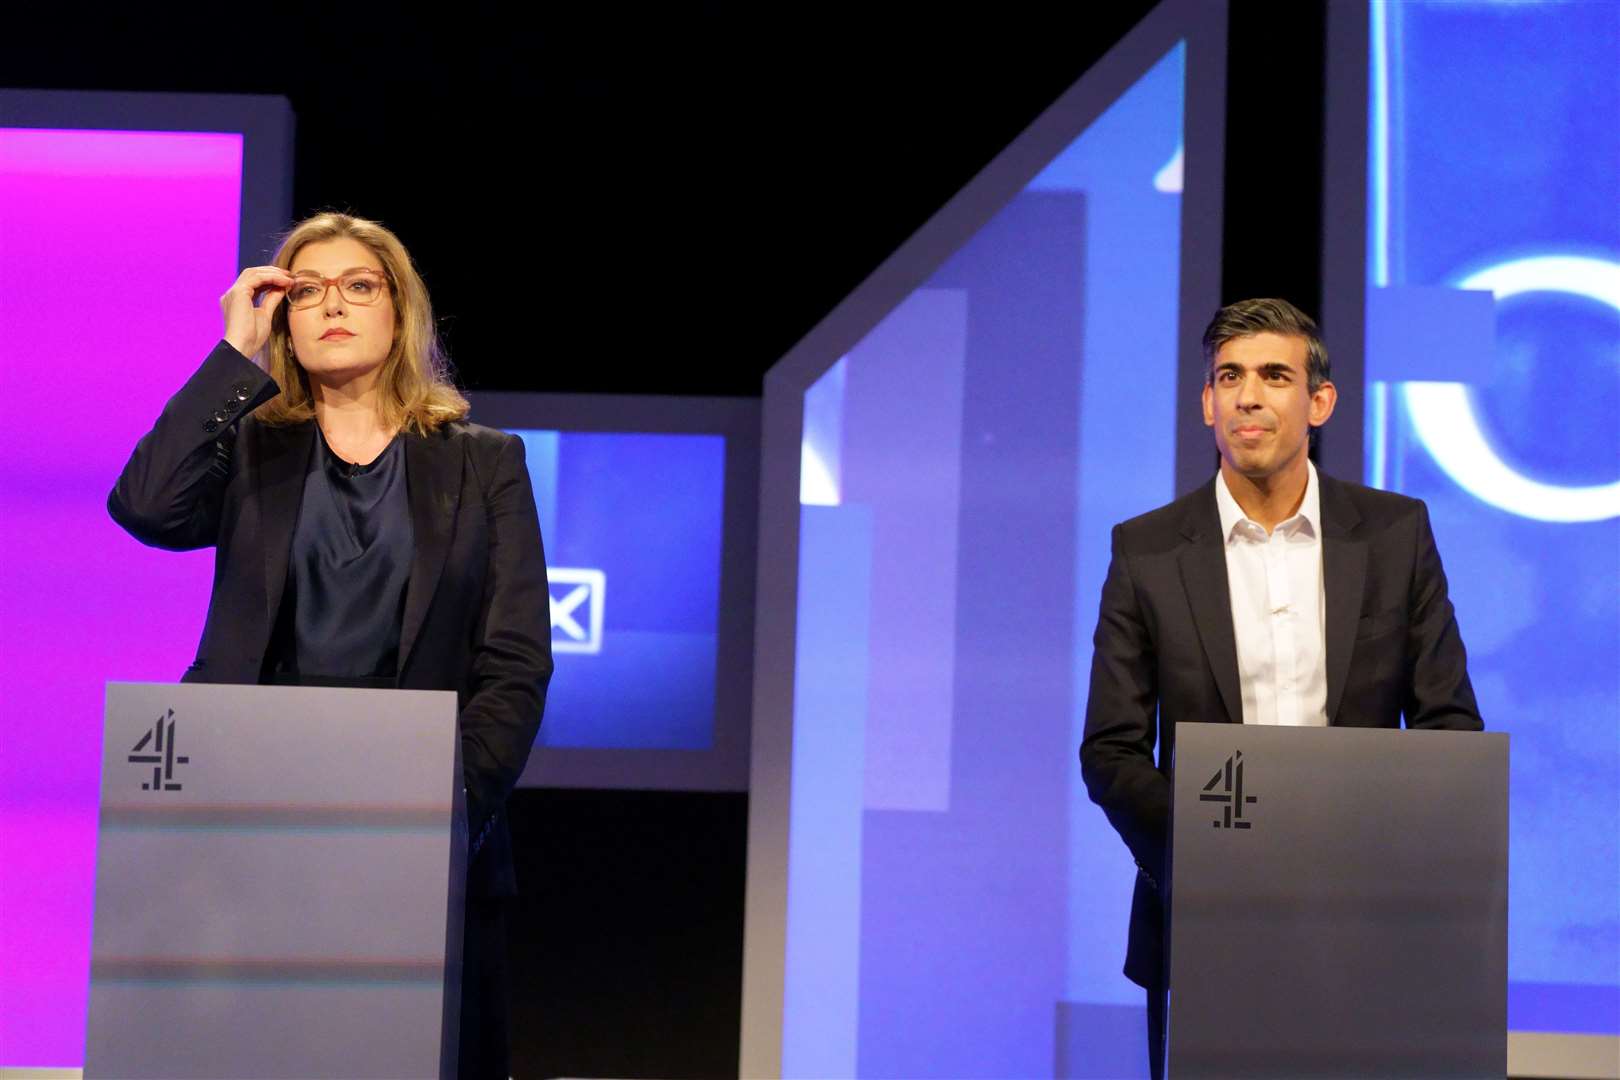 Penny Mordaunt and Rishi Sunak clashed over tax cuts in the first TV debate (Victoria/Jones/PA)